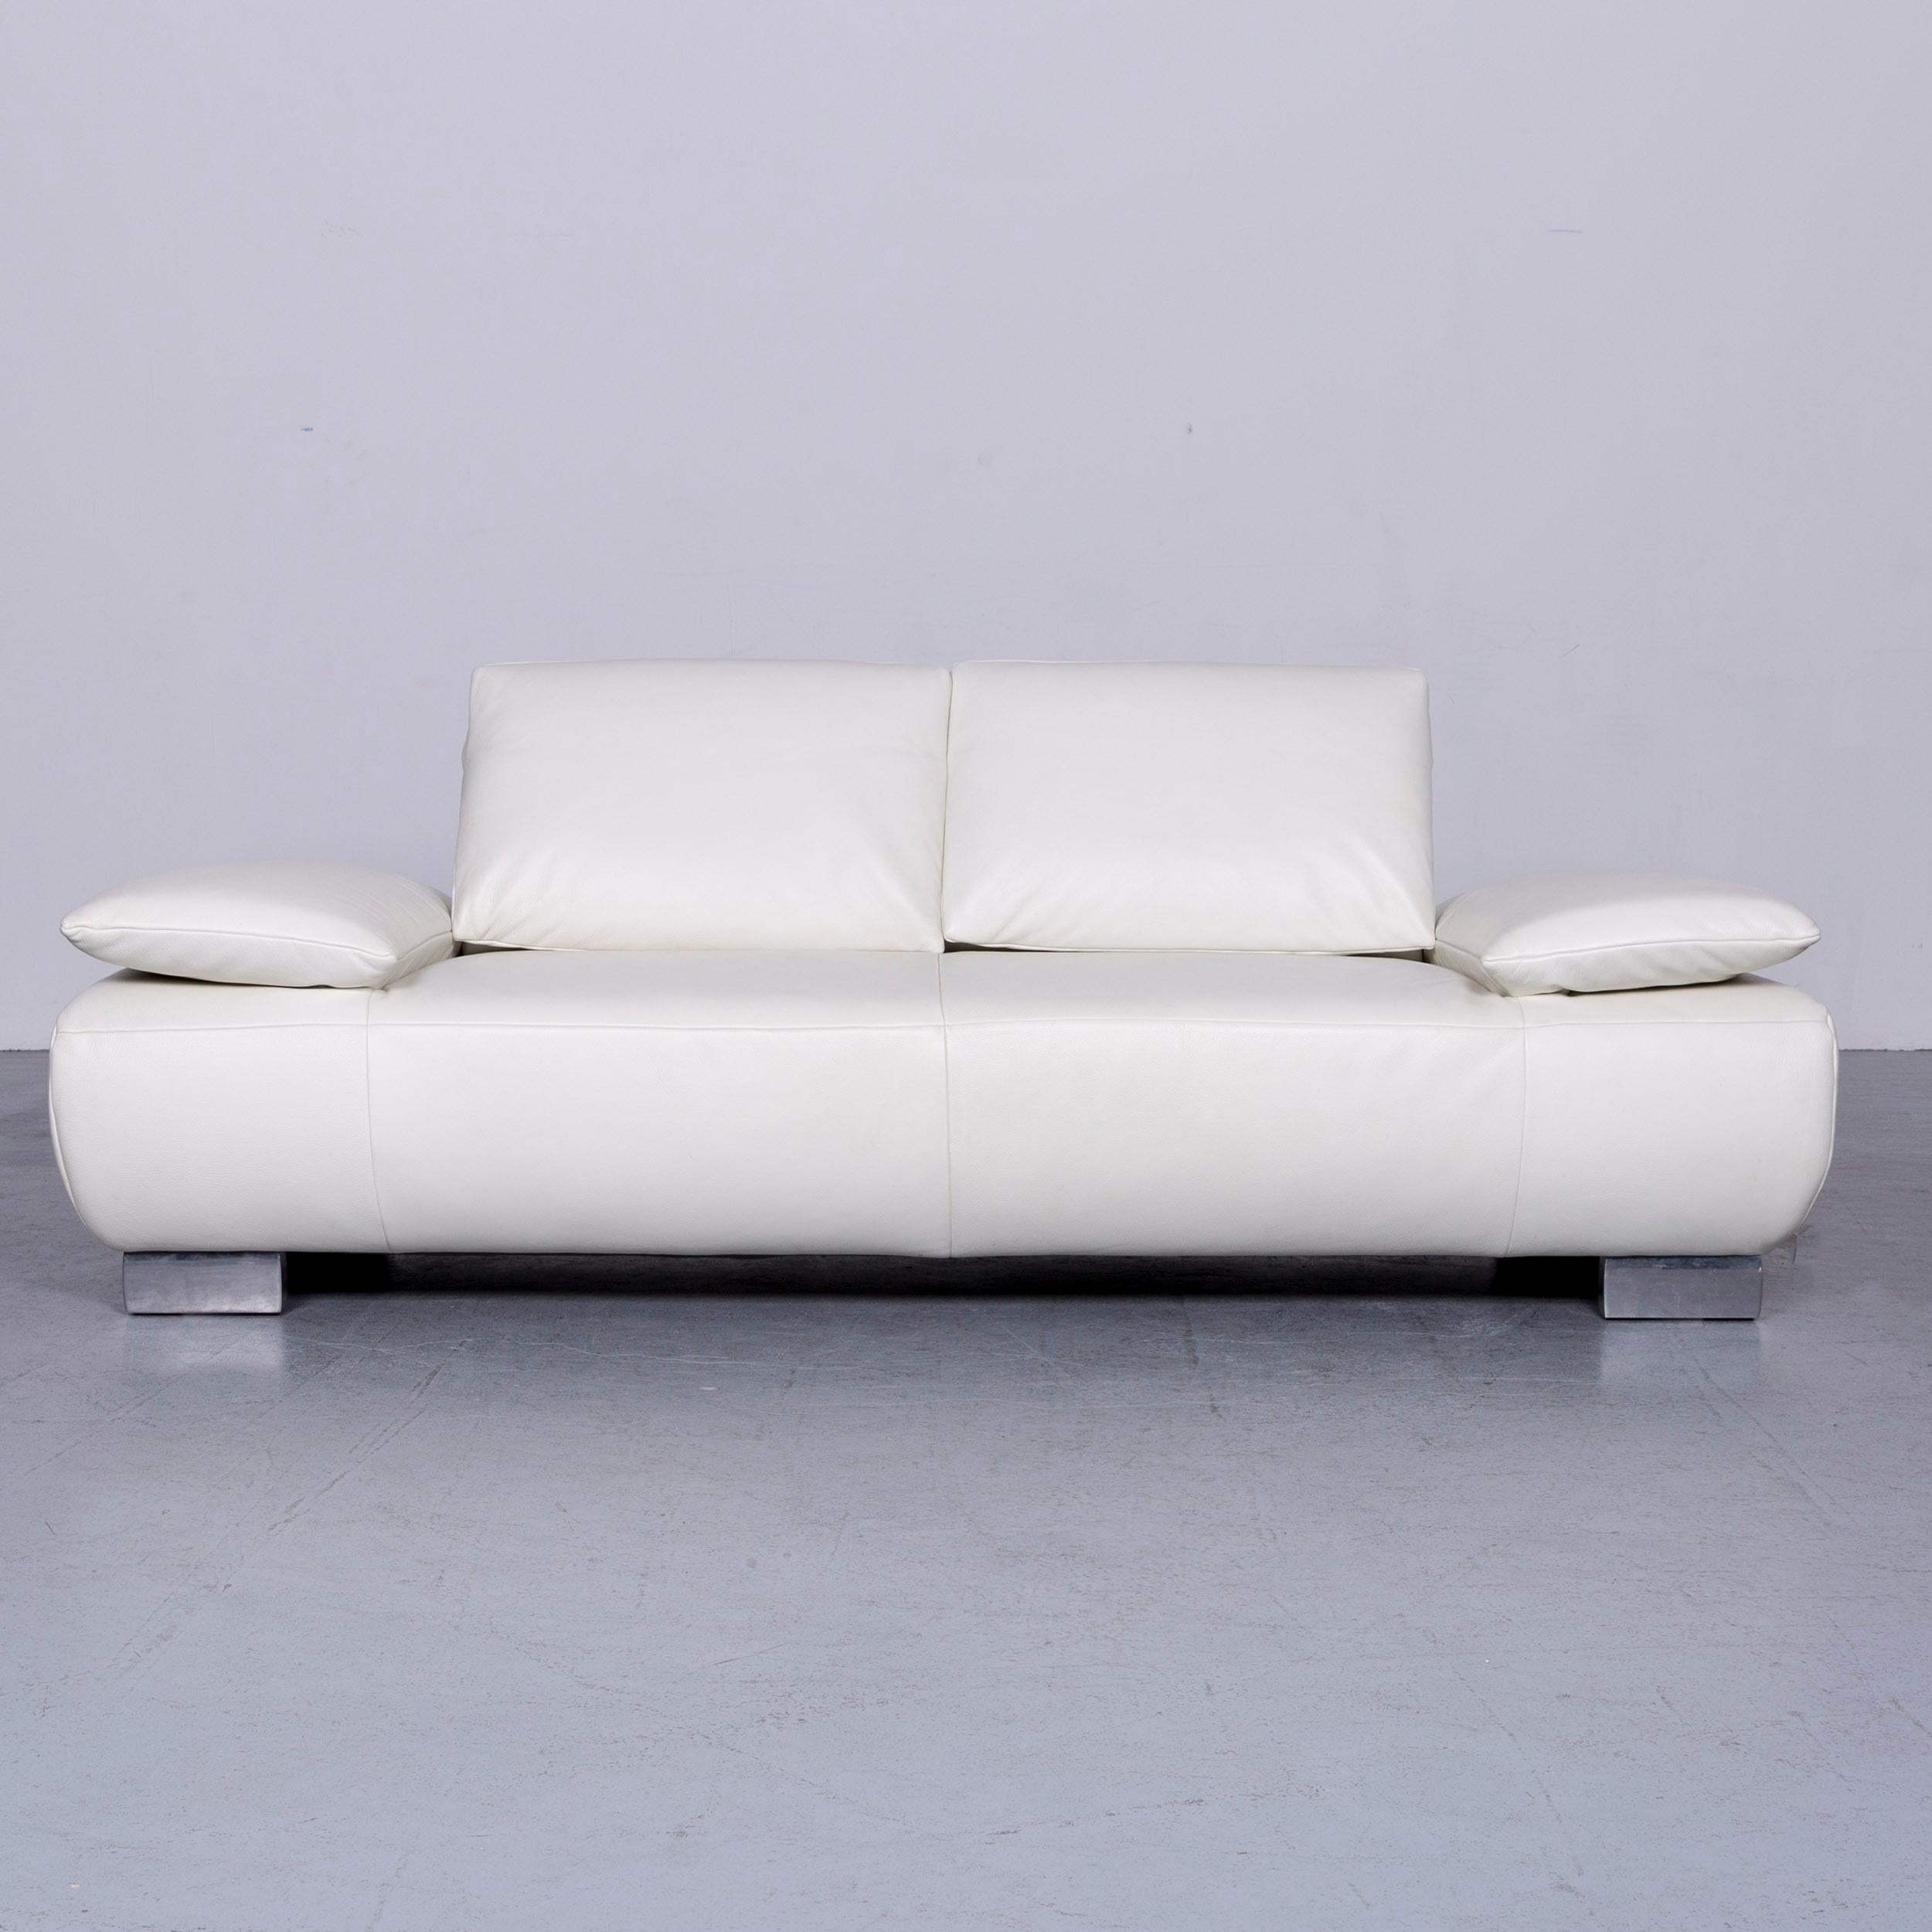 We bring to you an Koinor Volare designer sofa white three-seat leather couch with function.